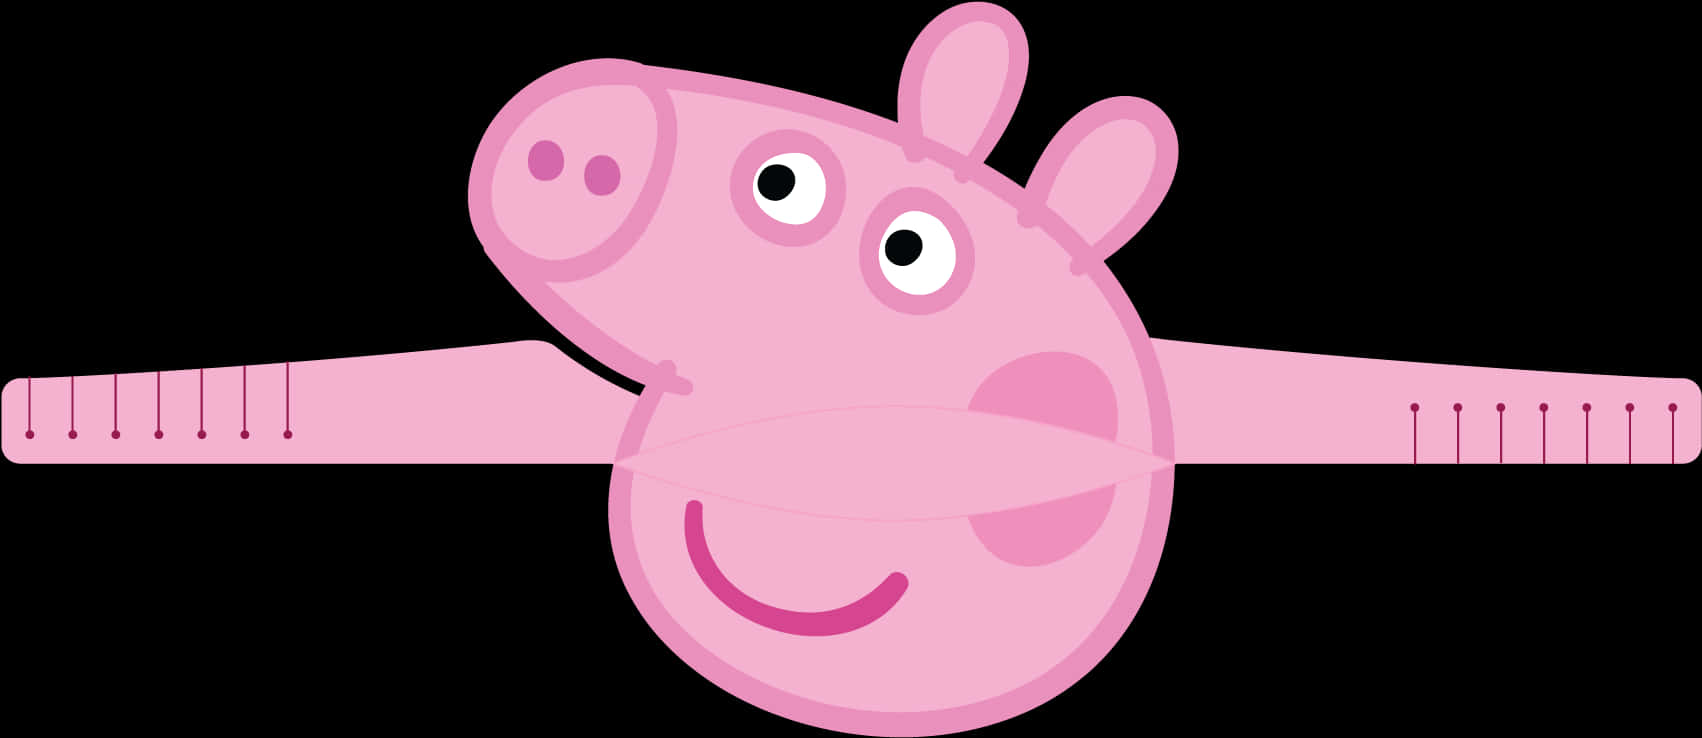 Peppa Pig Smiling Face Vector PNG